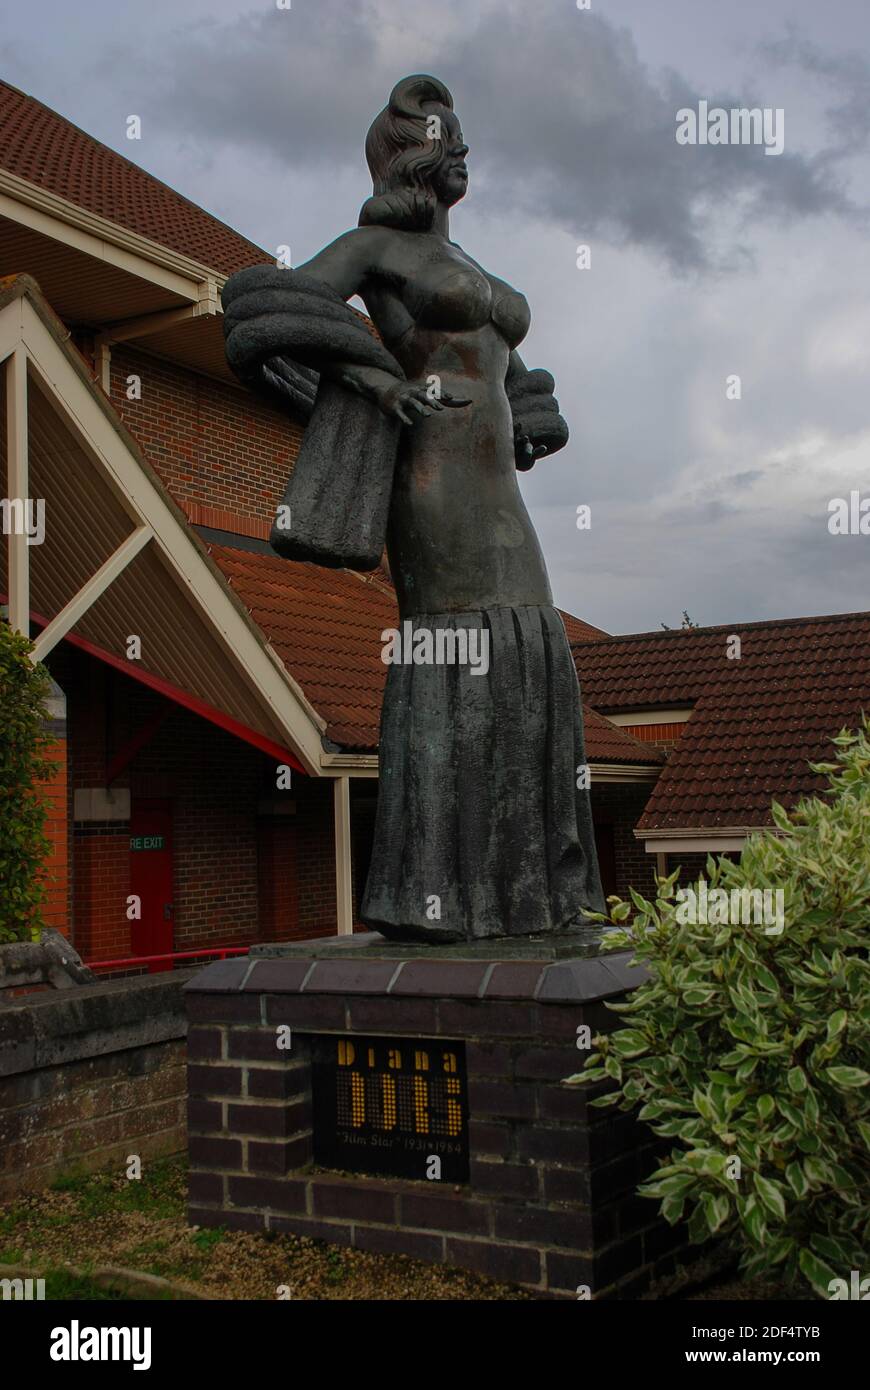 The statue of Diana Dors in Swindon, Wiltshire, UK Stock Photo